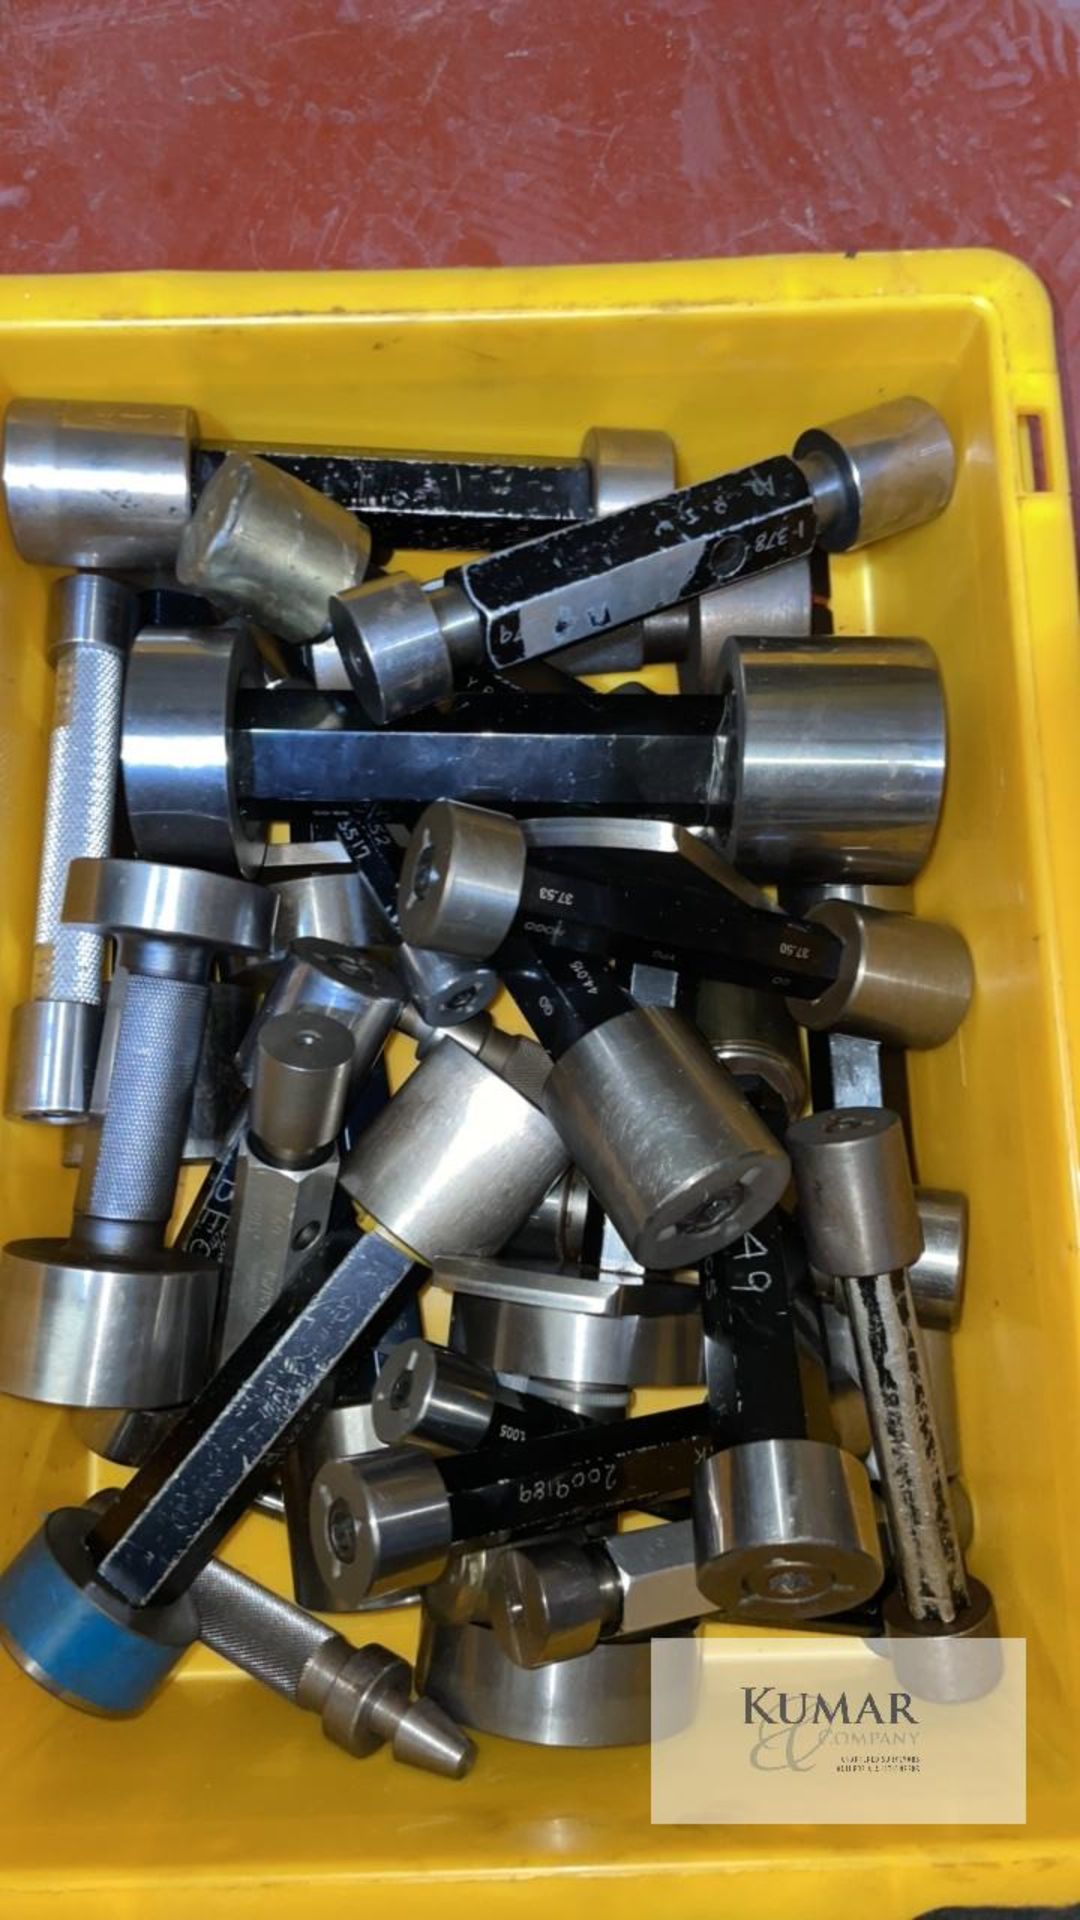 Various job lot plug gauges Metric and imperial Please Note This Lot Does Not Include Plastic - Image 5 of 5